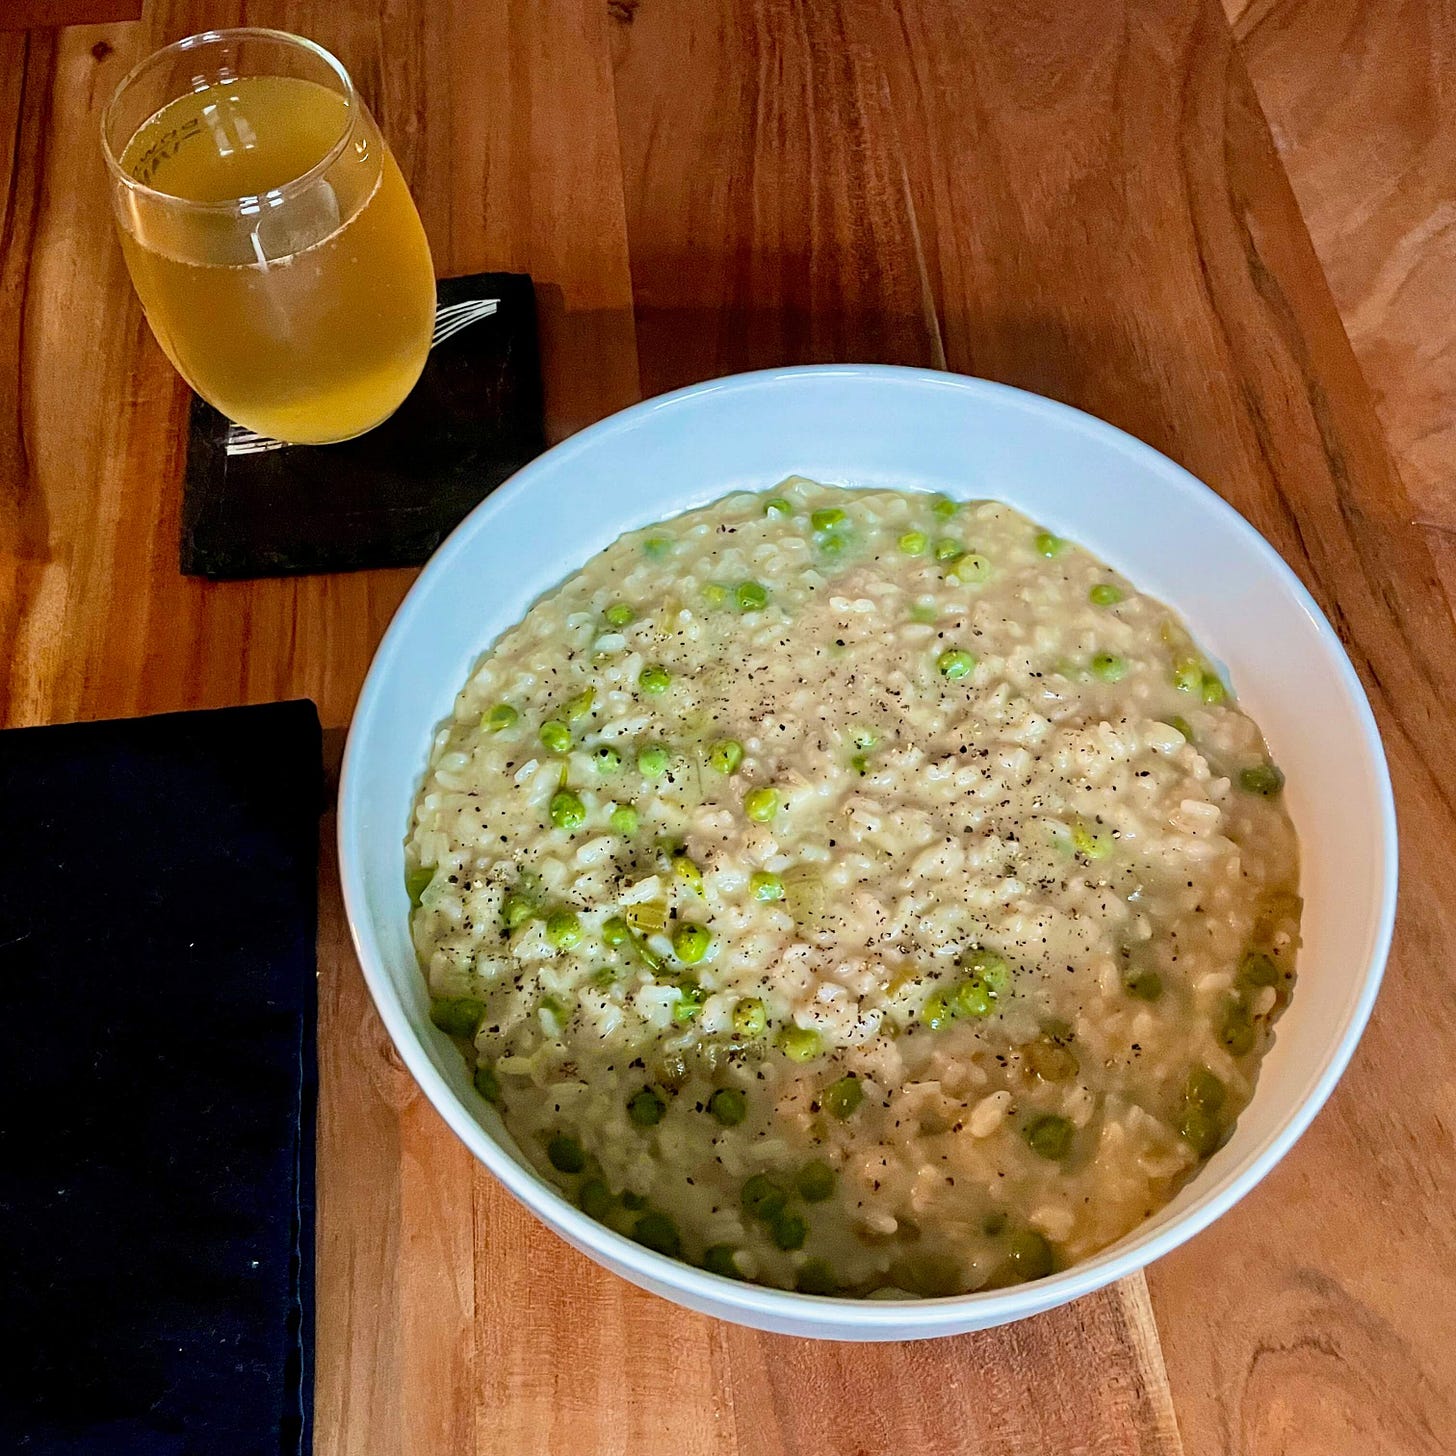 A bowl of risotto with green peas in the center of the image. To the top left is a small glass with kombucha in it.